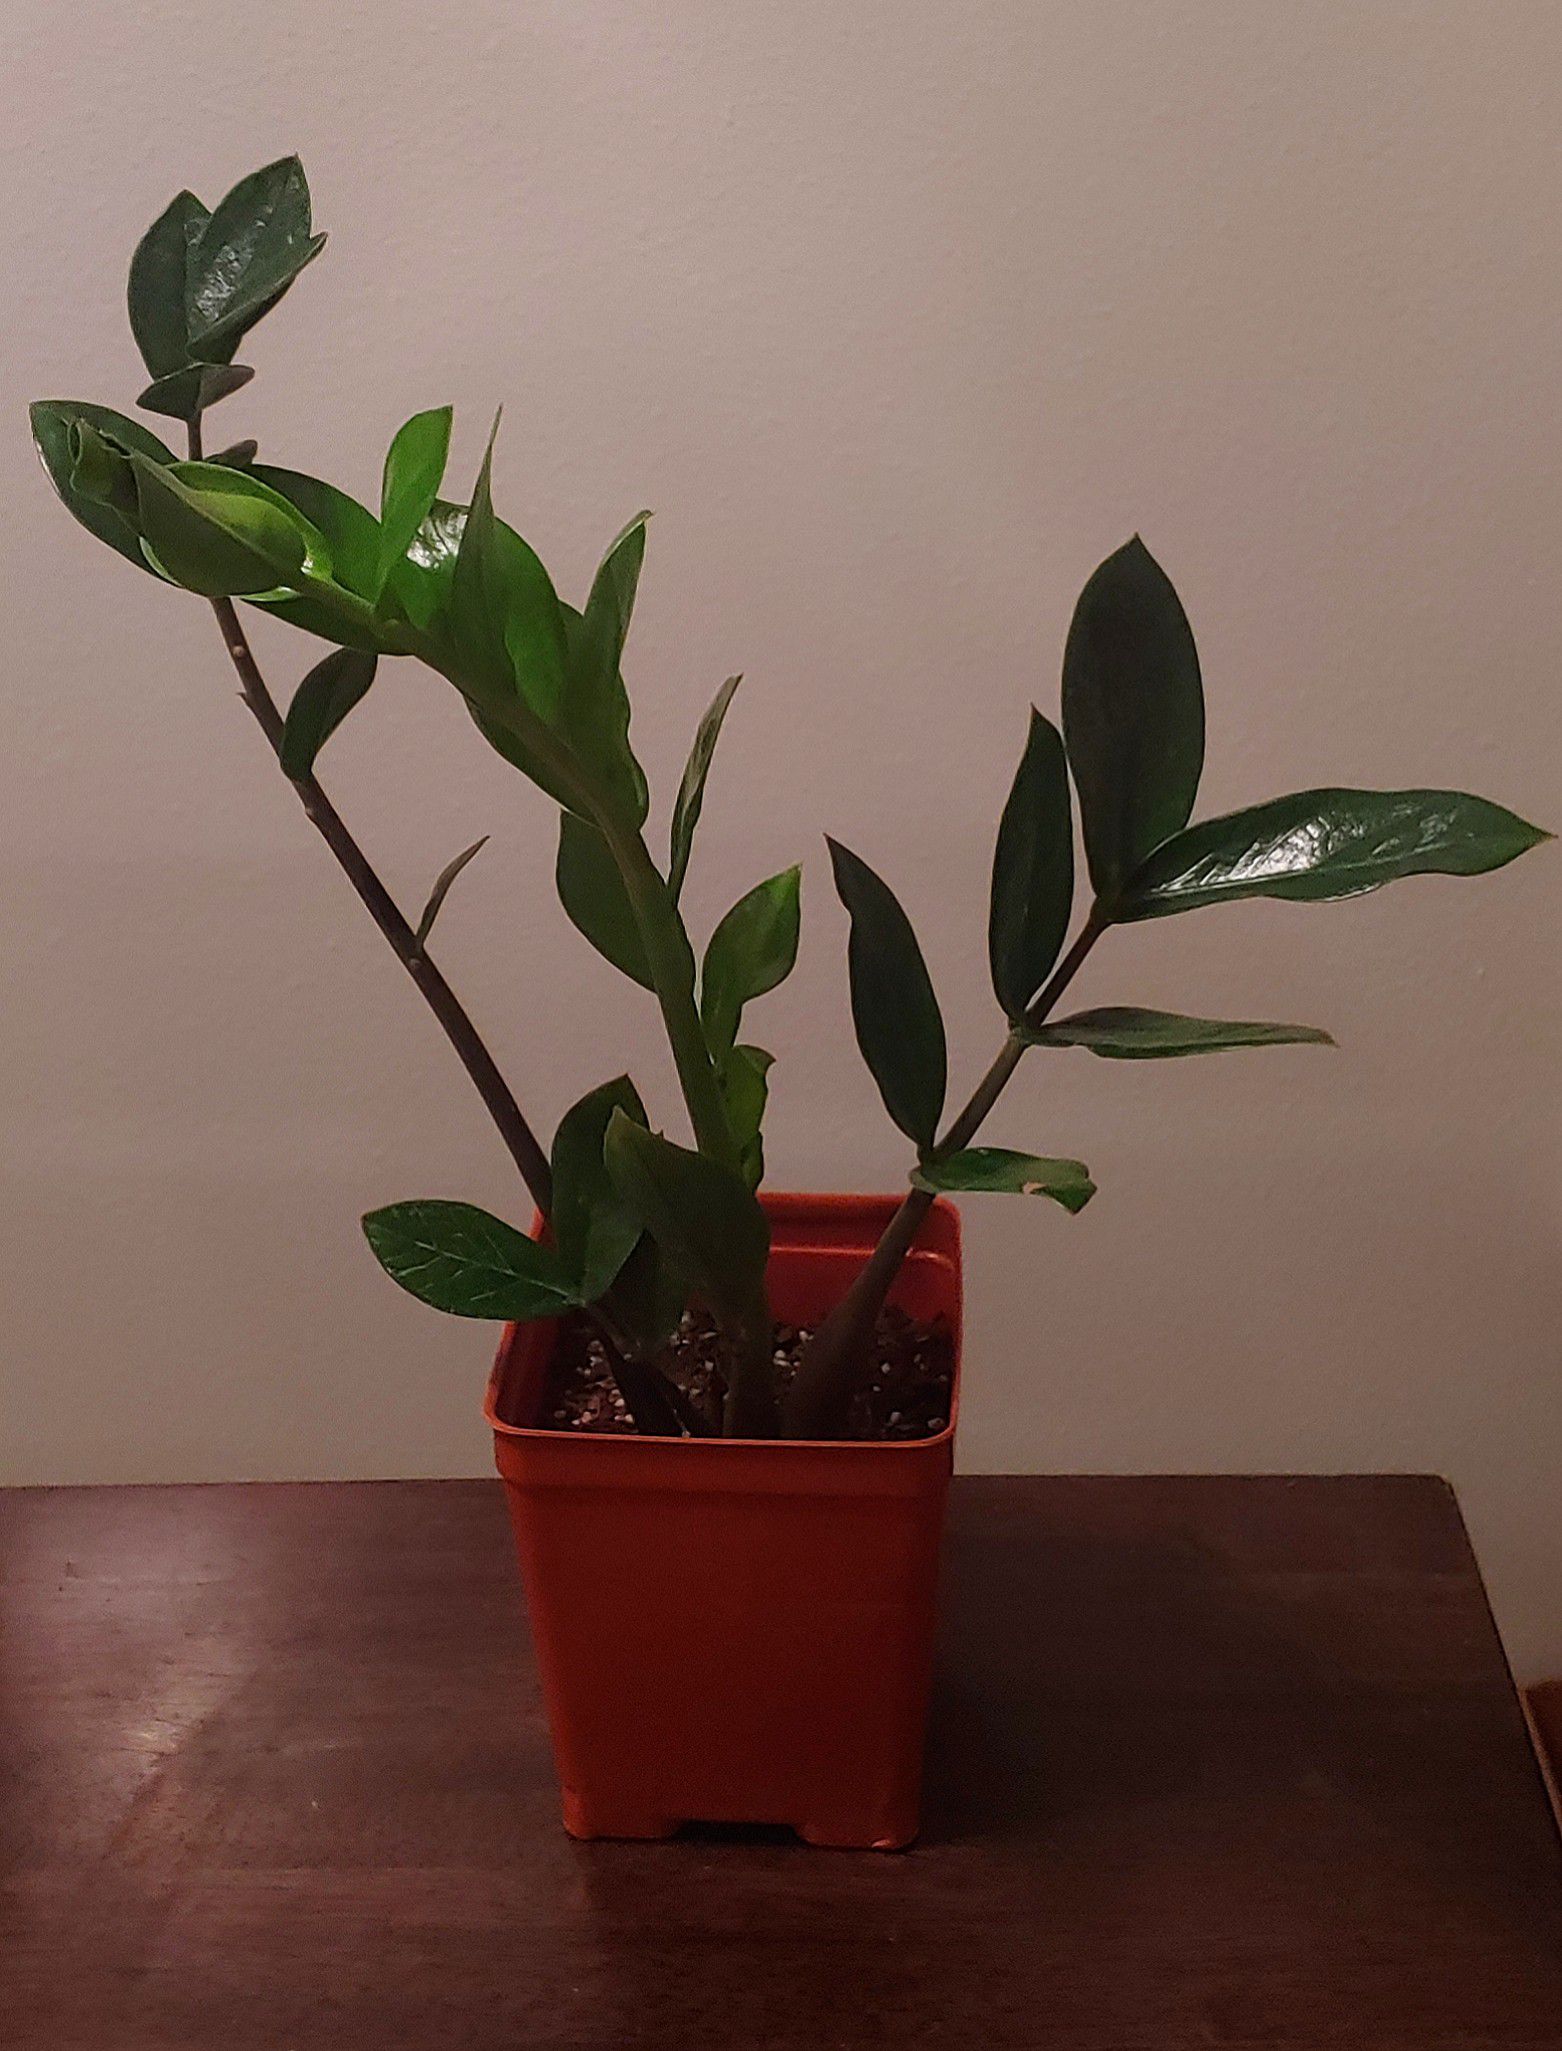 Zz plant 6" container